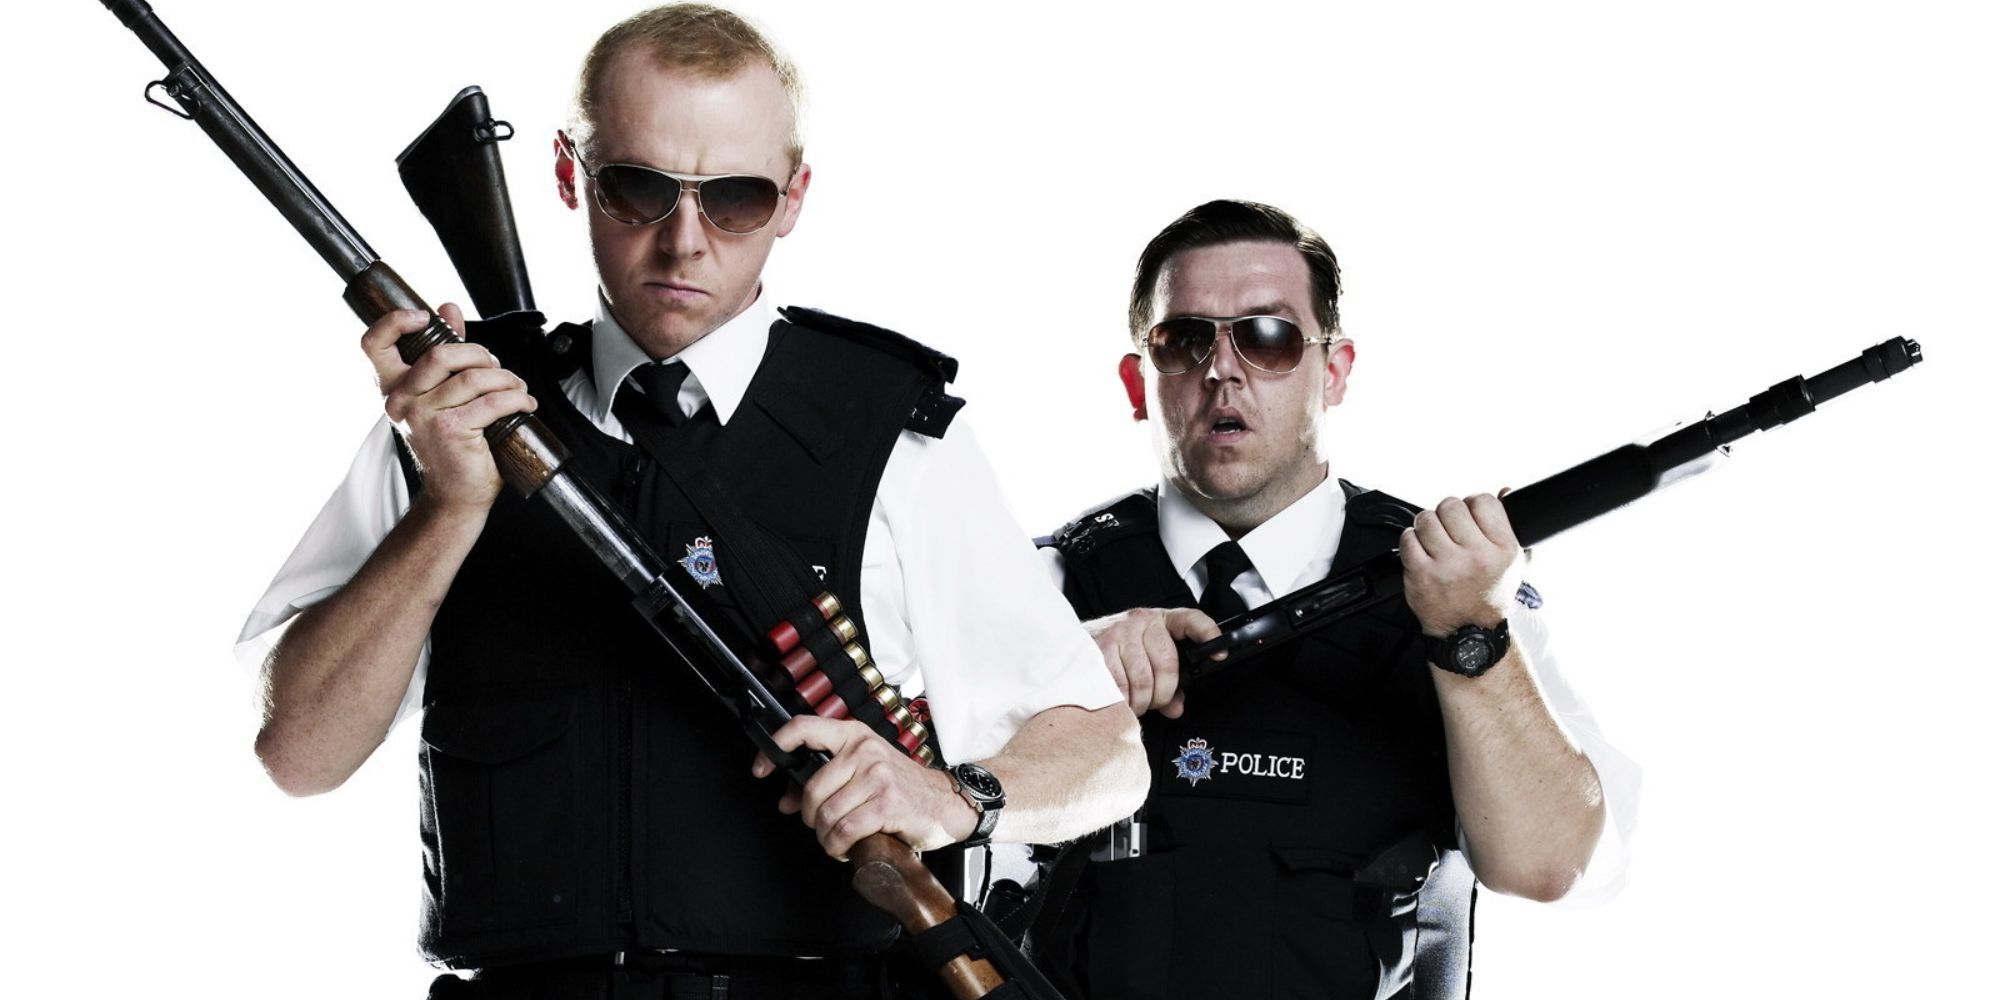 Poster from the 2007 film Hot Fuzz